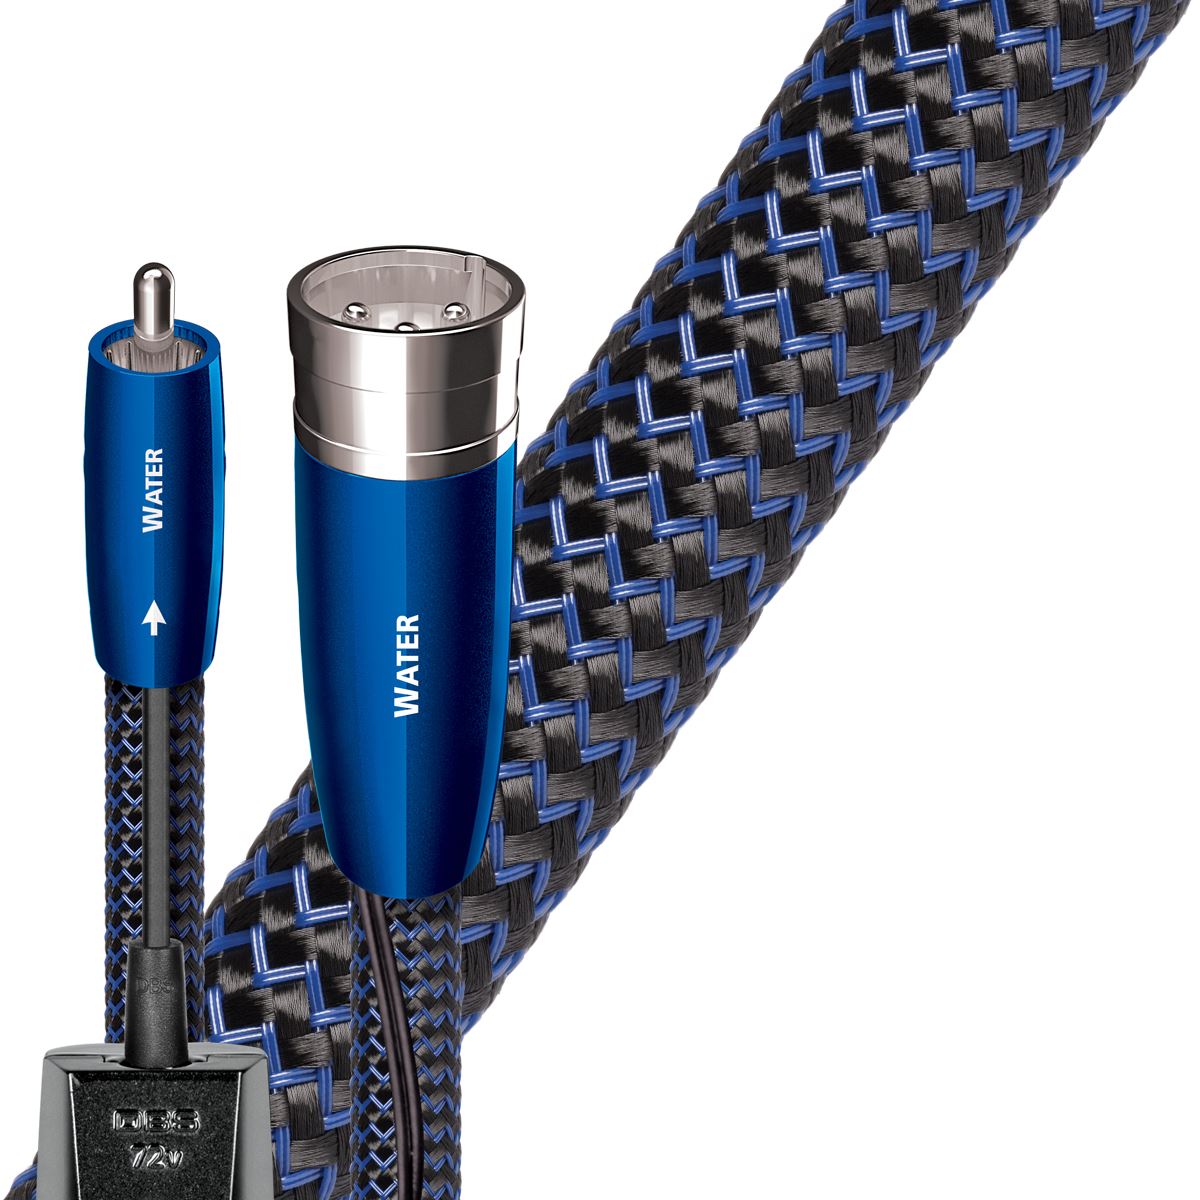 AUDIOQUEST_Water_2M_1_to_1_RCA_male._Solid_perf_surface_copper_plus._Triple_balanced._Polyethylene_air-tubes._Cold-welded,silver_over_copper_TER_Jacket_-_blue_-_black_braid 2059